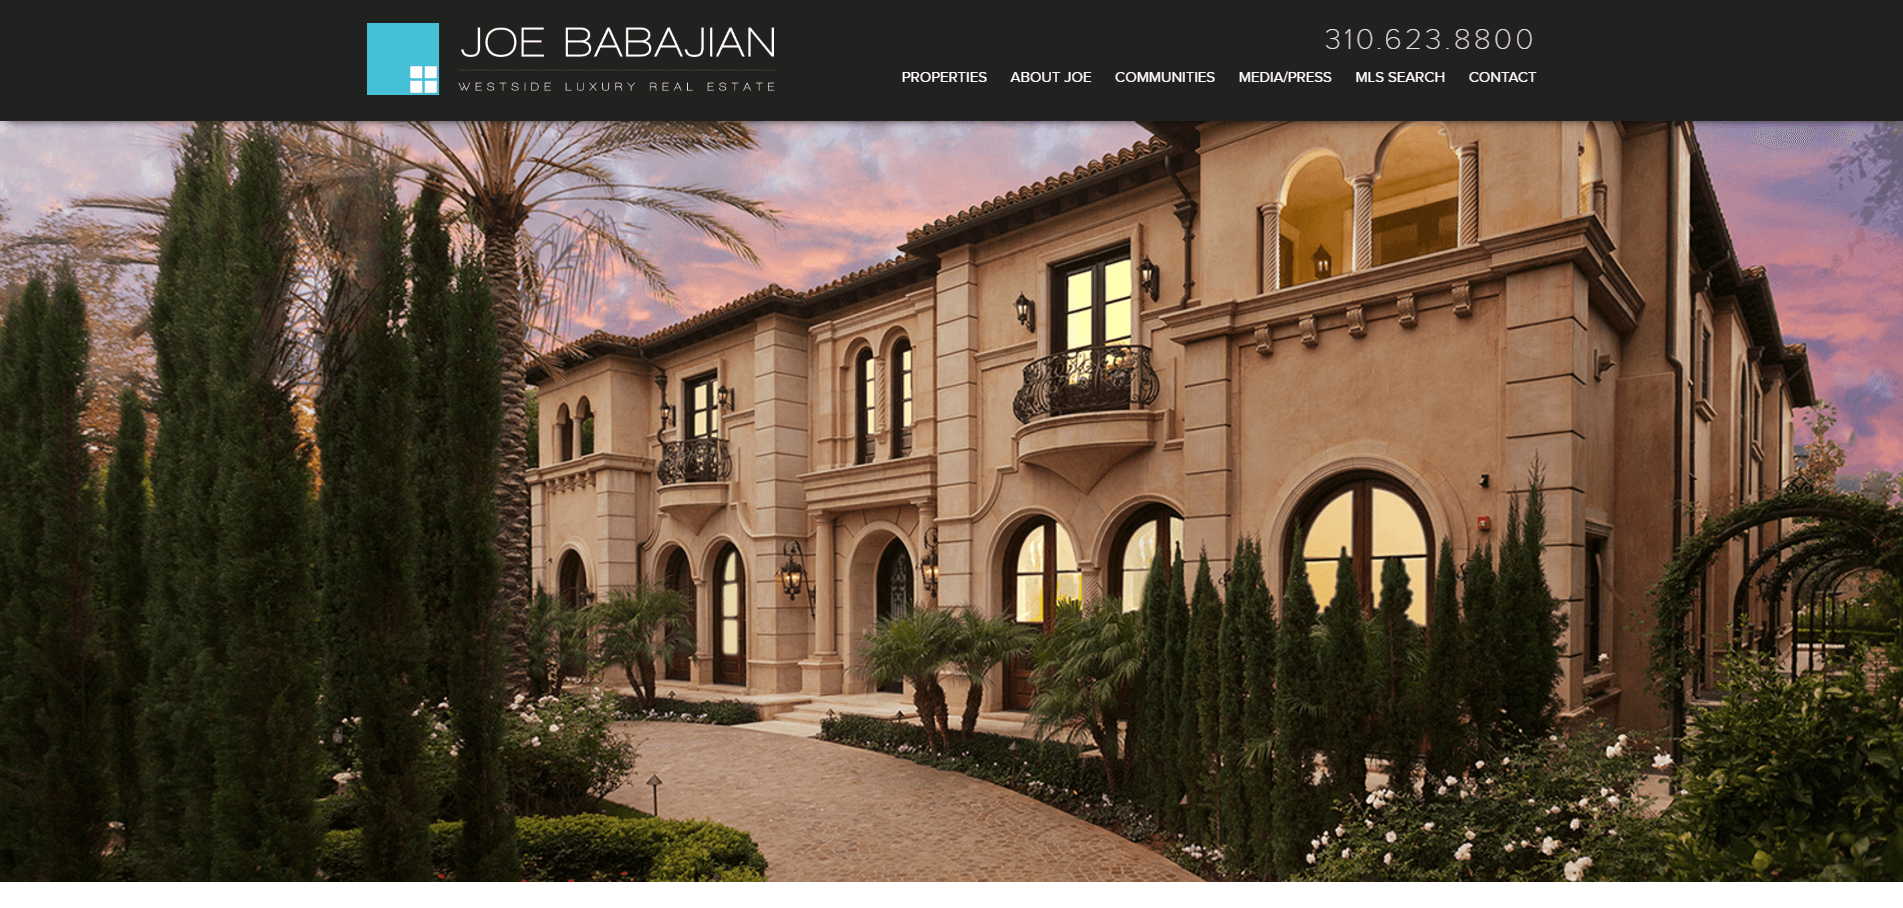  Crazy!  Here are 101 of the best real estate websites.  We reviewed and ranked each site, 1-101.  Here's joebabajian.com. 